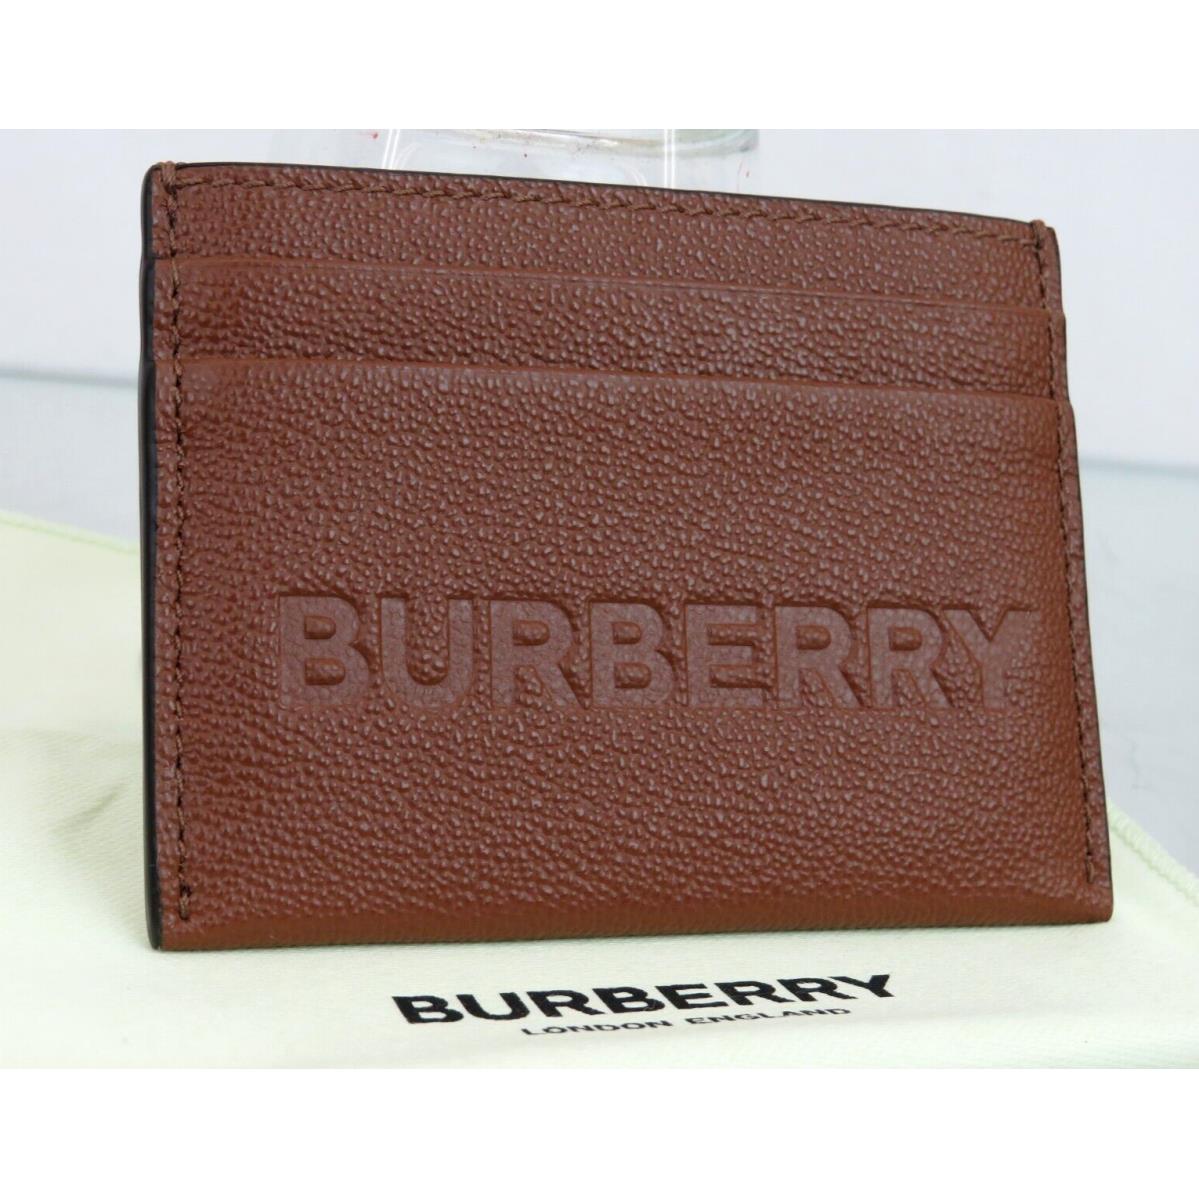 Burberry Sandon Brown Tan Grained Leather Logo Card Holder Case Wallet